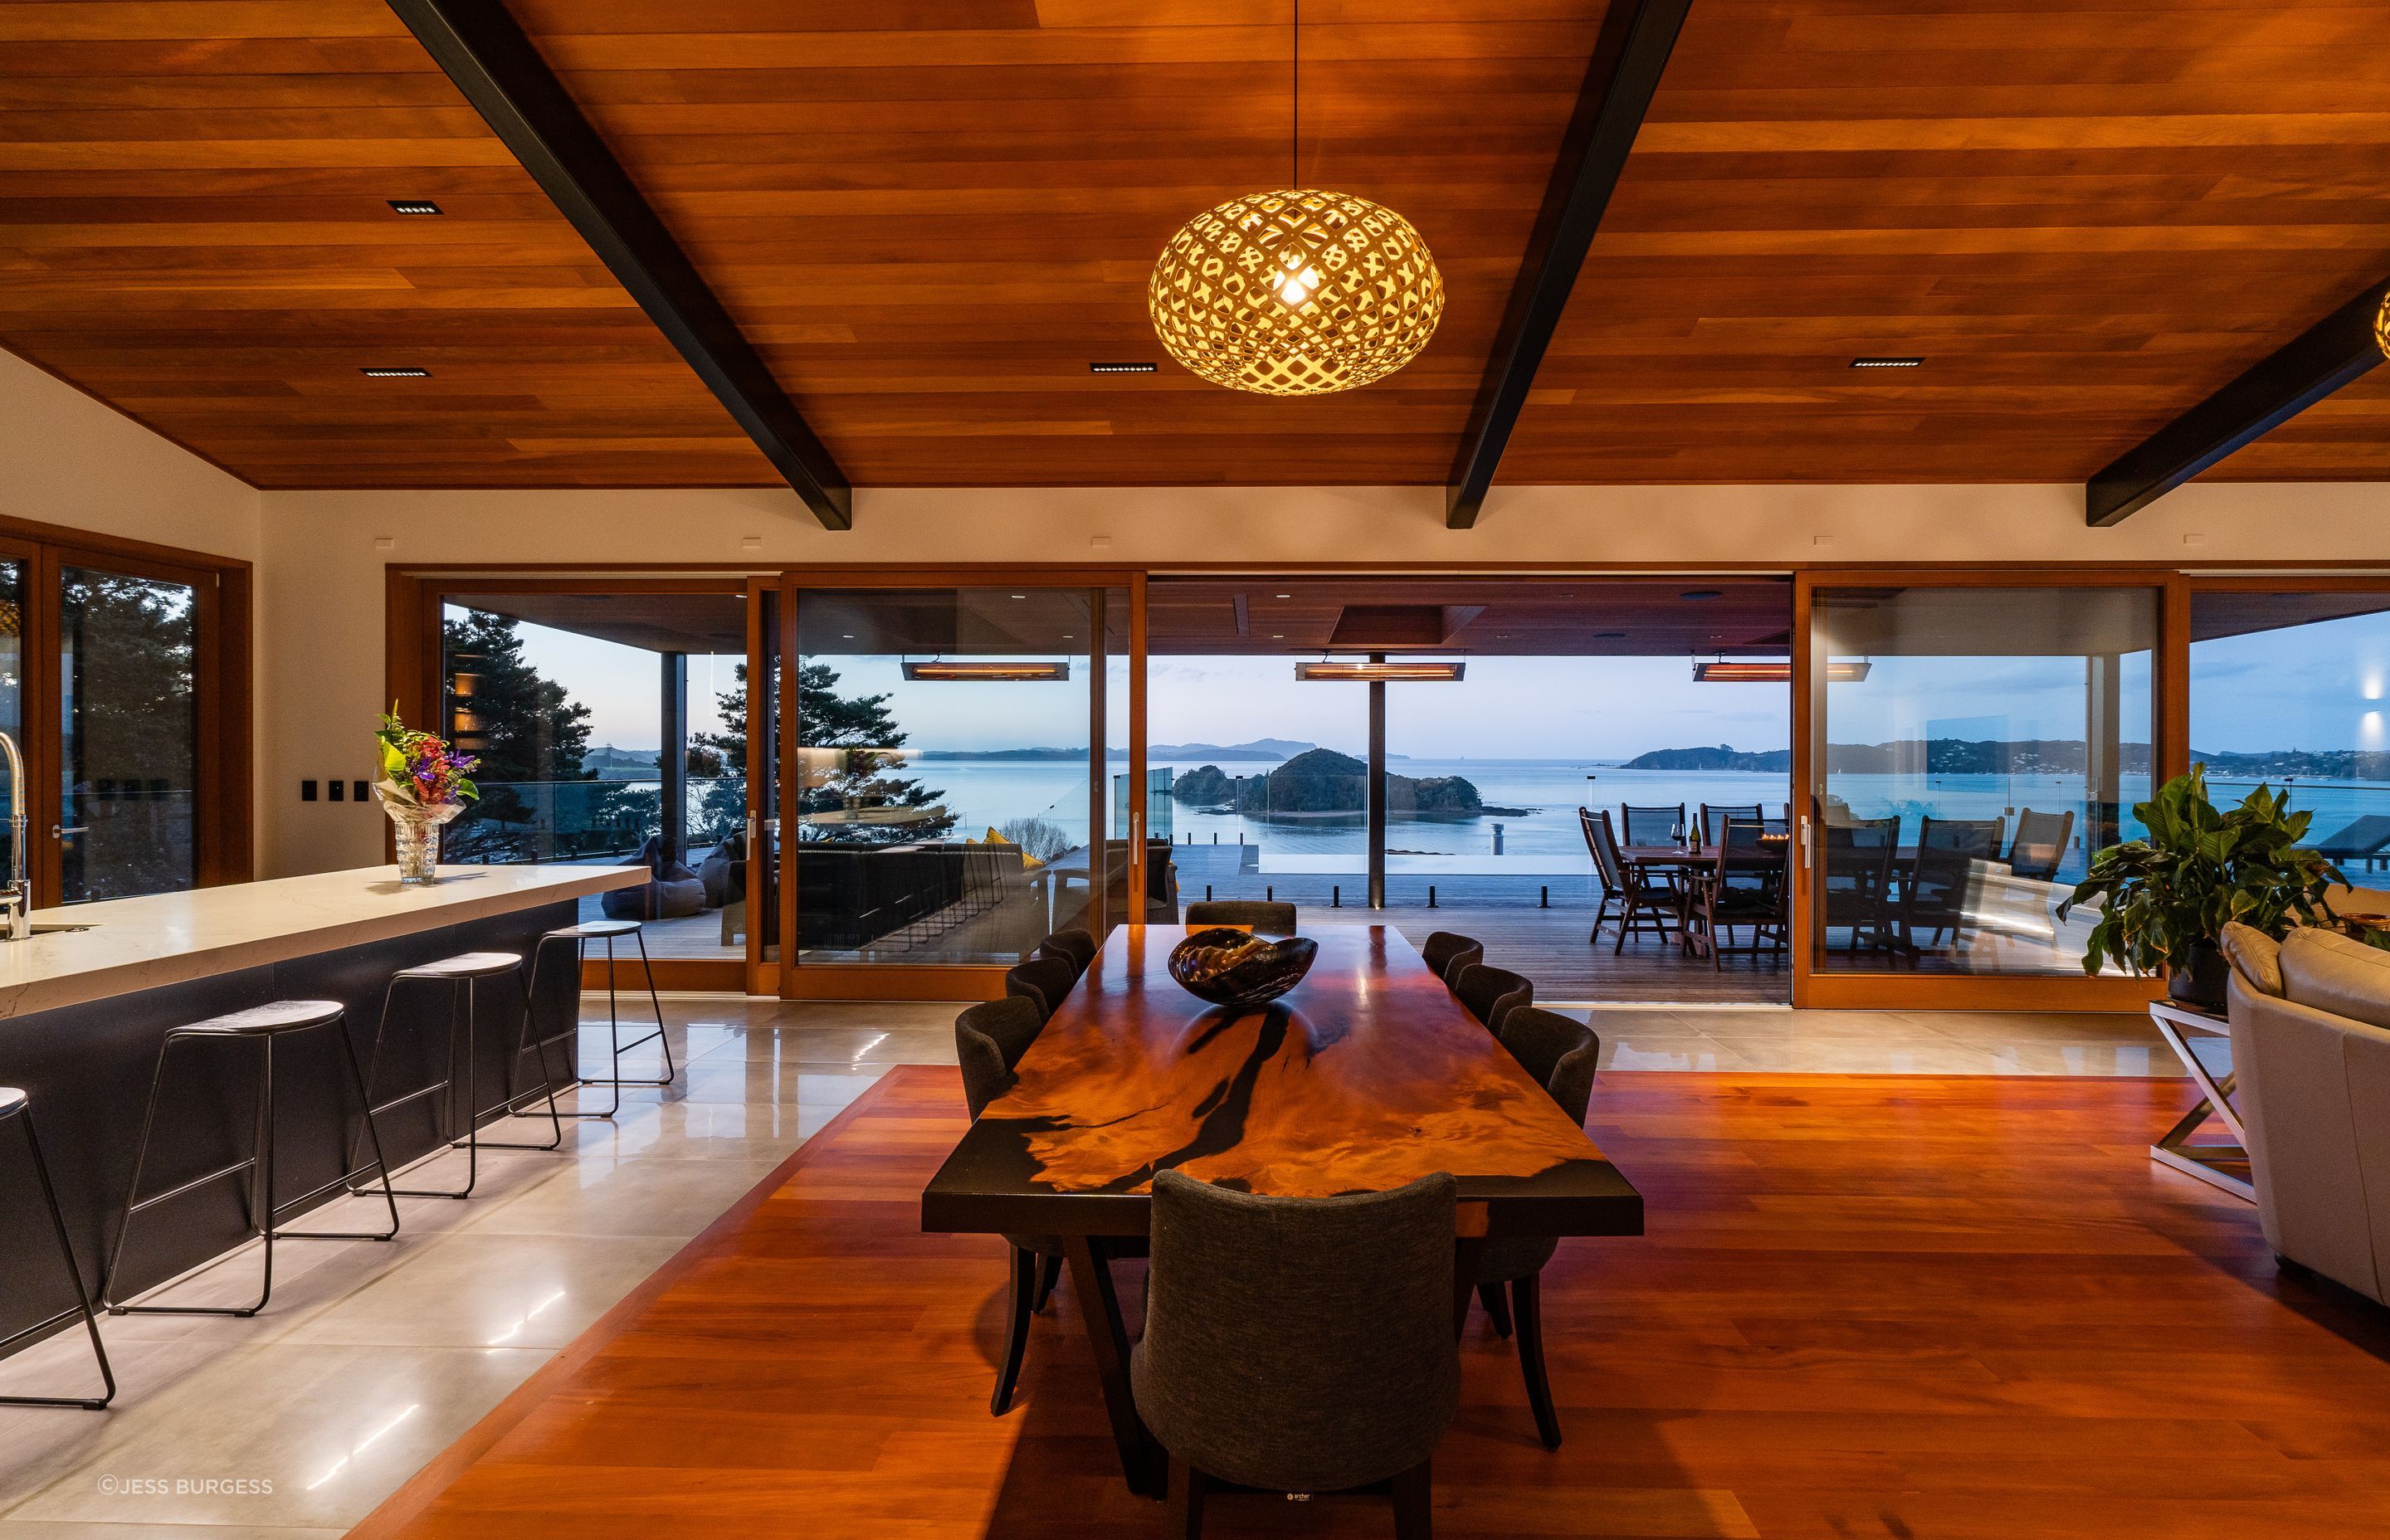 The wood for the inlay floor was sourced by the homeowner. The 13.5m doors were custom made by Optimal Windows. “They slide beautifully,” says Alan. On the ceiling are pinpoint Laser Blade downlights by iGuzzini that reduce glare.